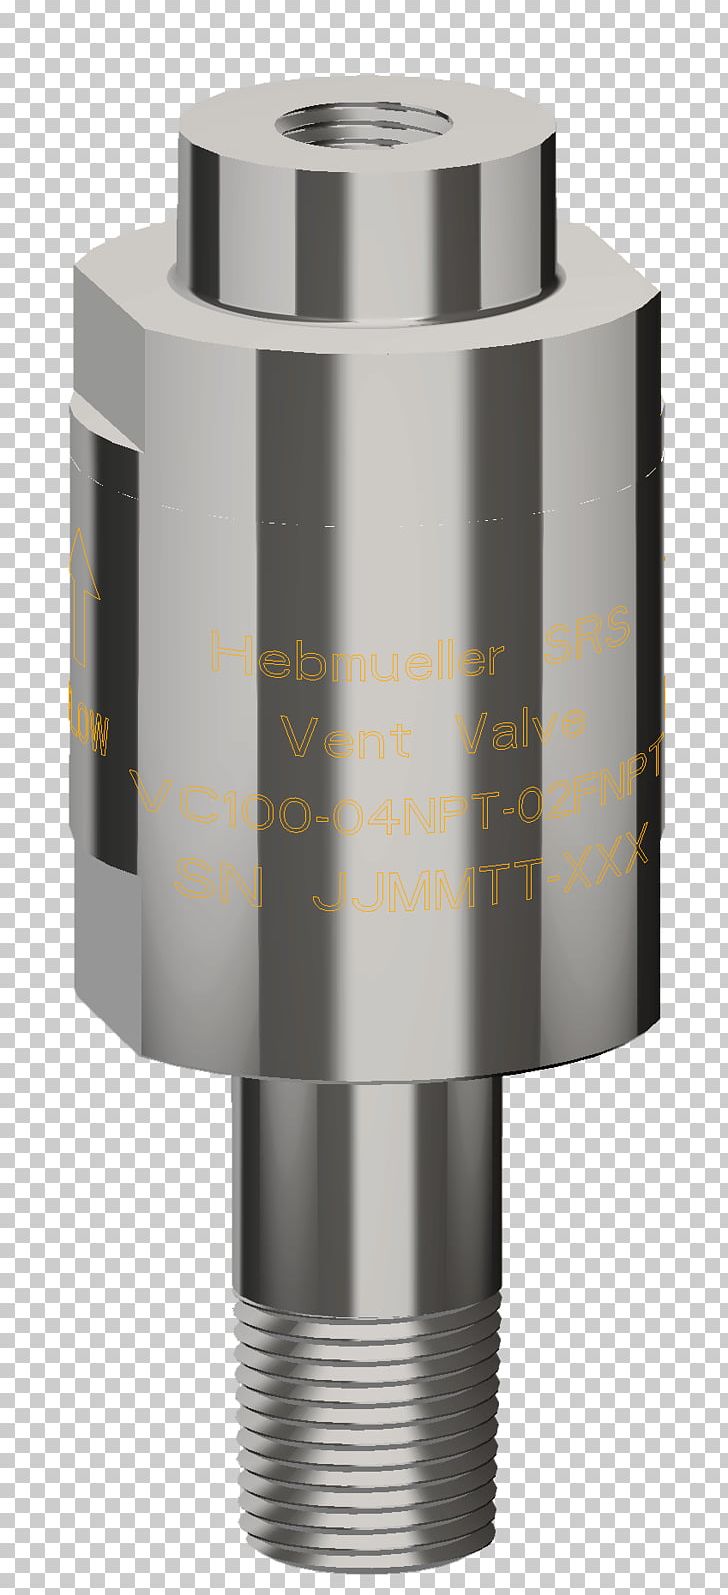 Cylinder Angle Design M PNG, Clipart, 1 4 Npt, Aerospace, Angle, Cylinder, Design M Free PNG Download